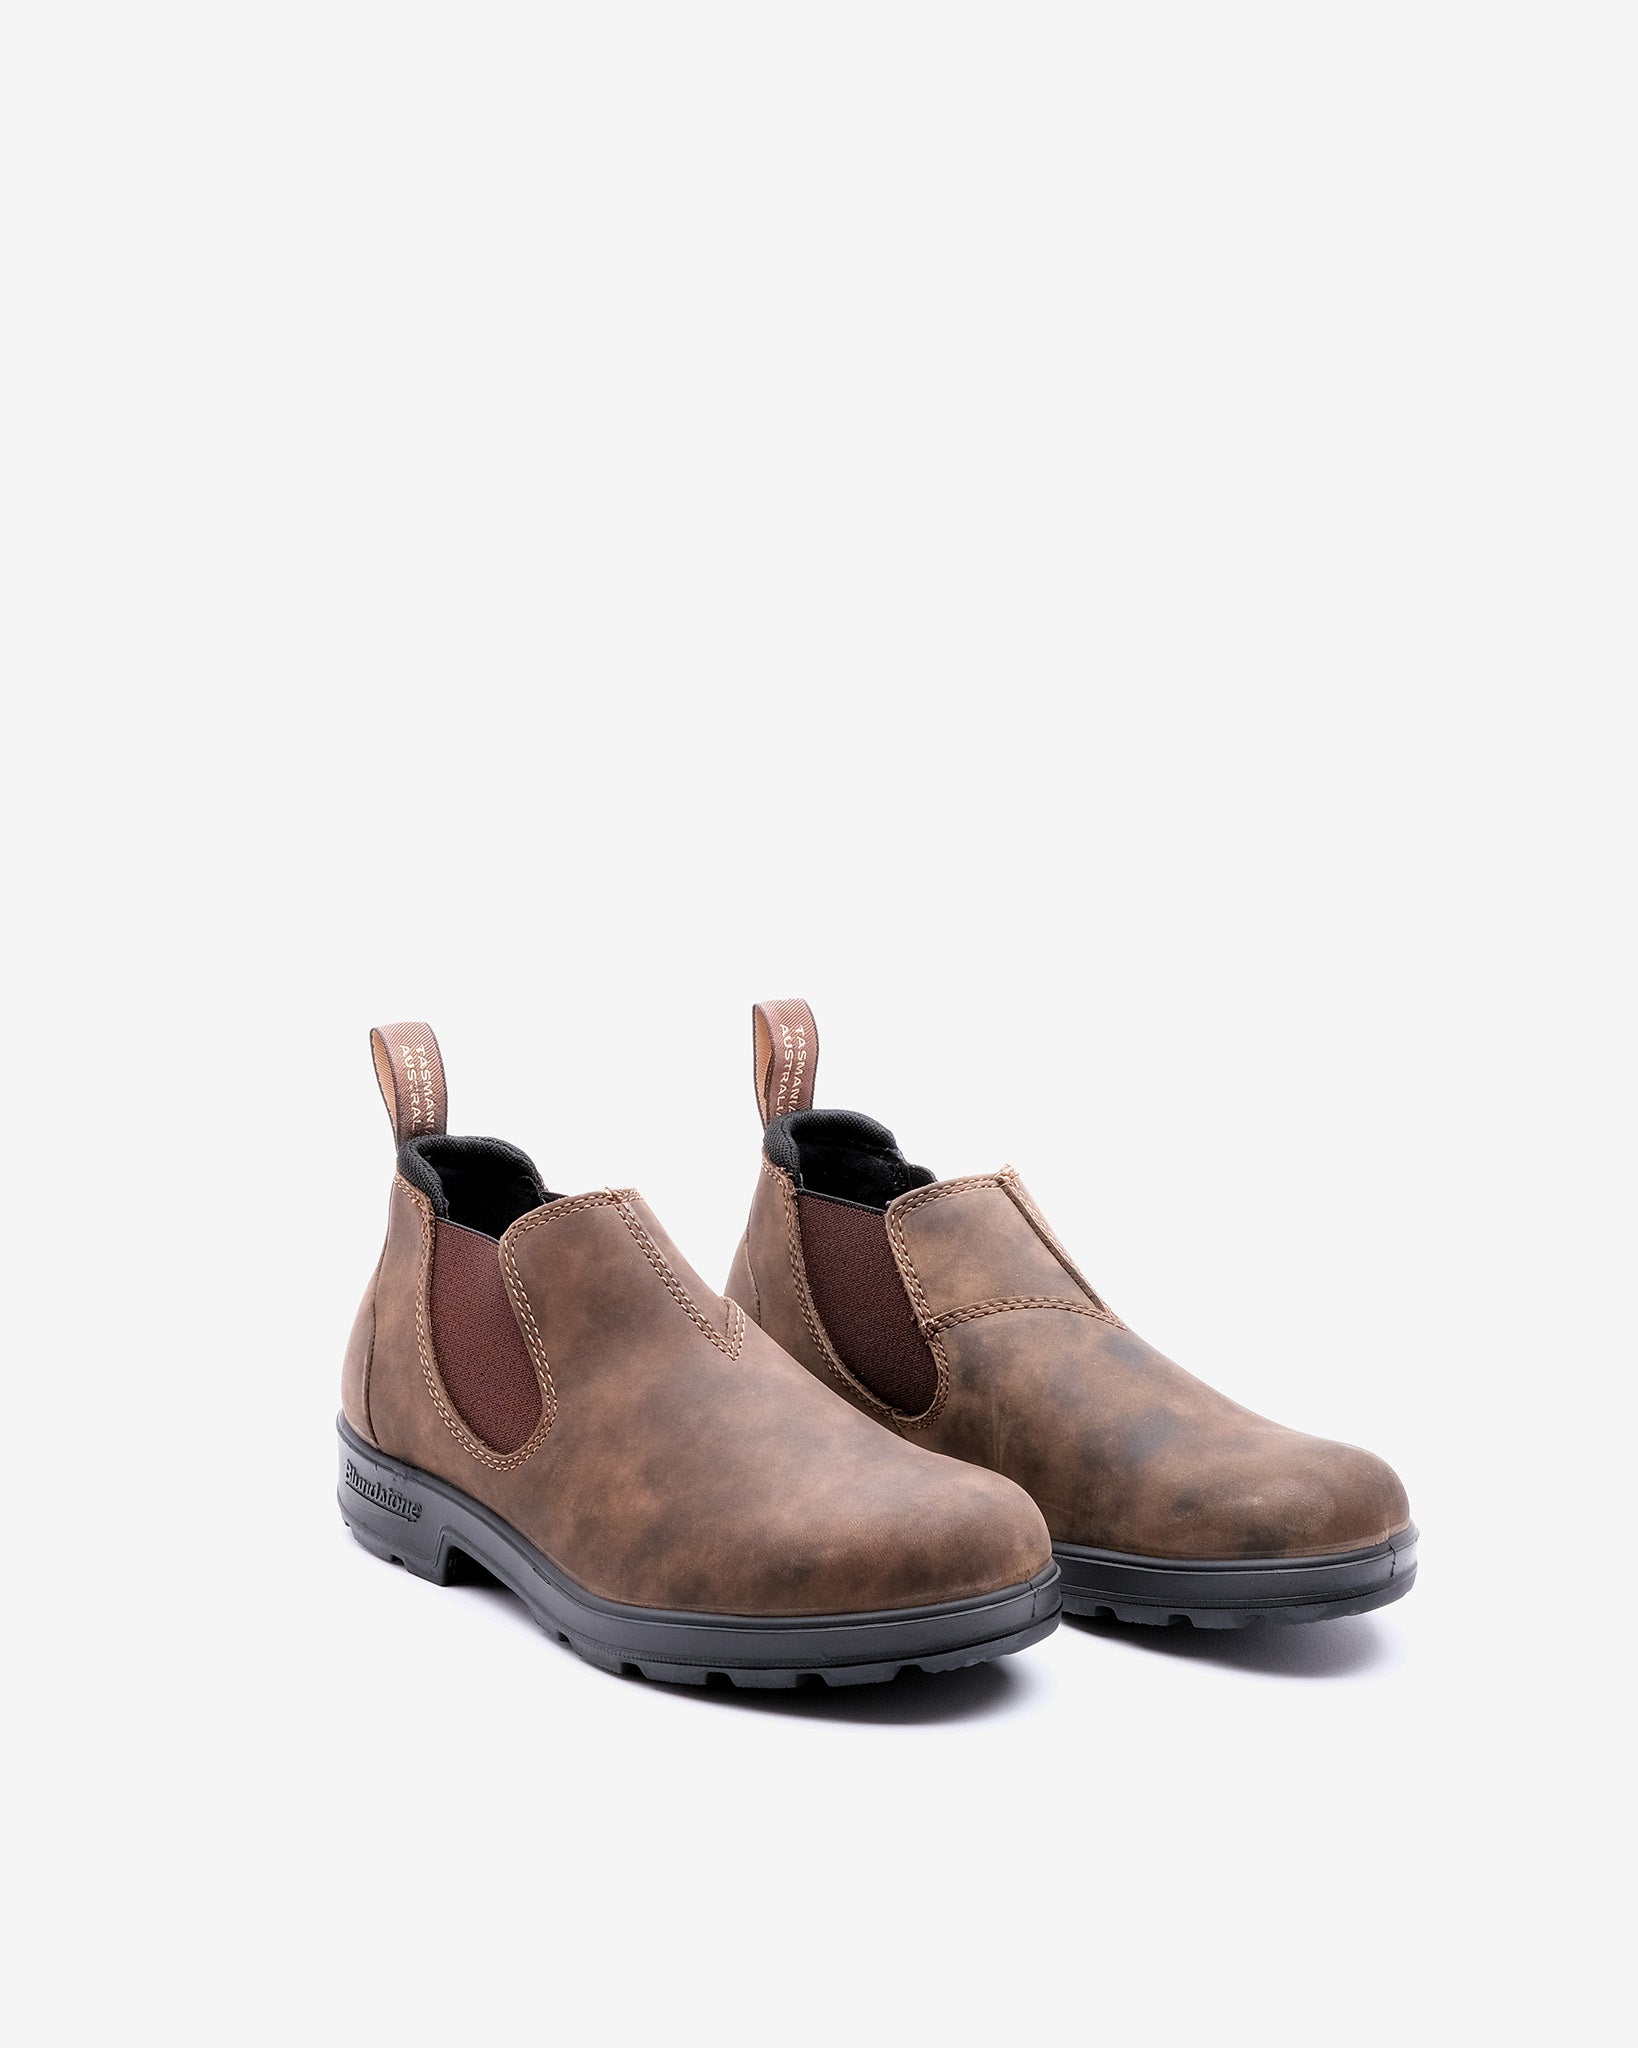 2036 Rustic Brown Leather Shoes